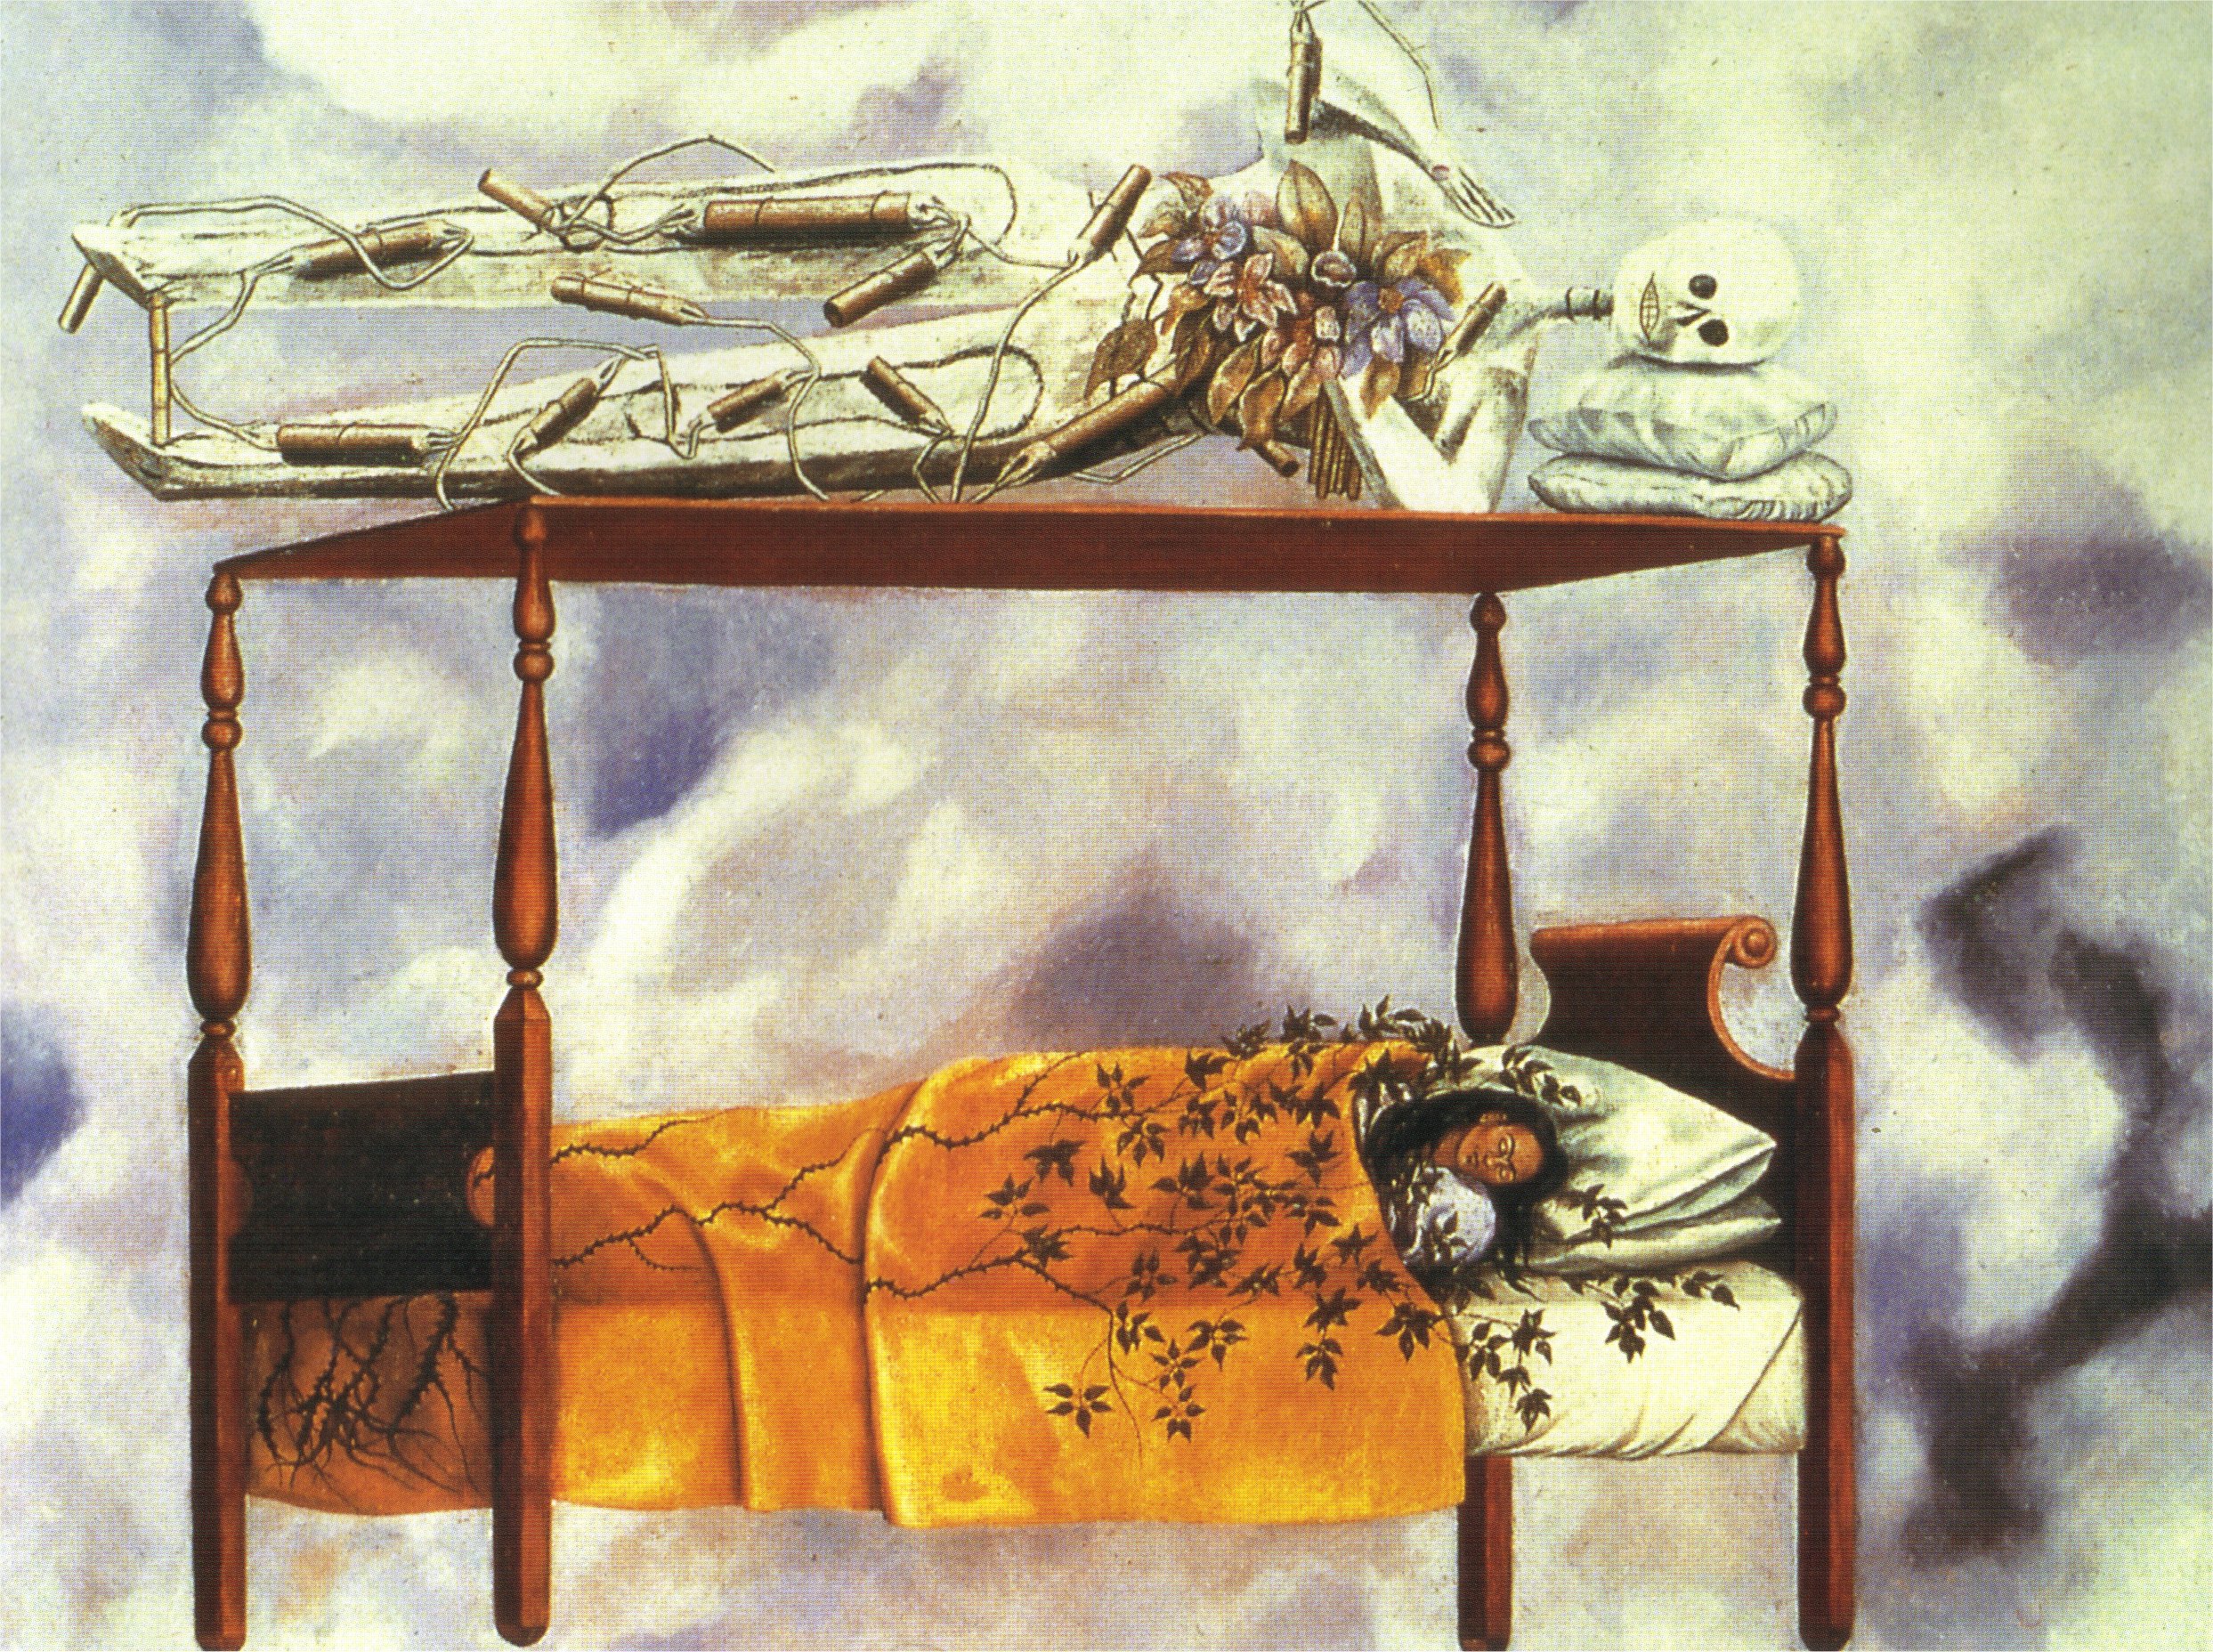 The Dream (The Bed) (1940).